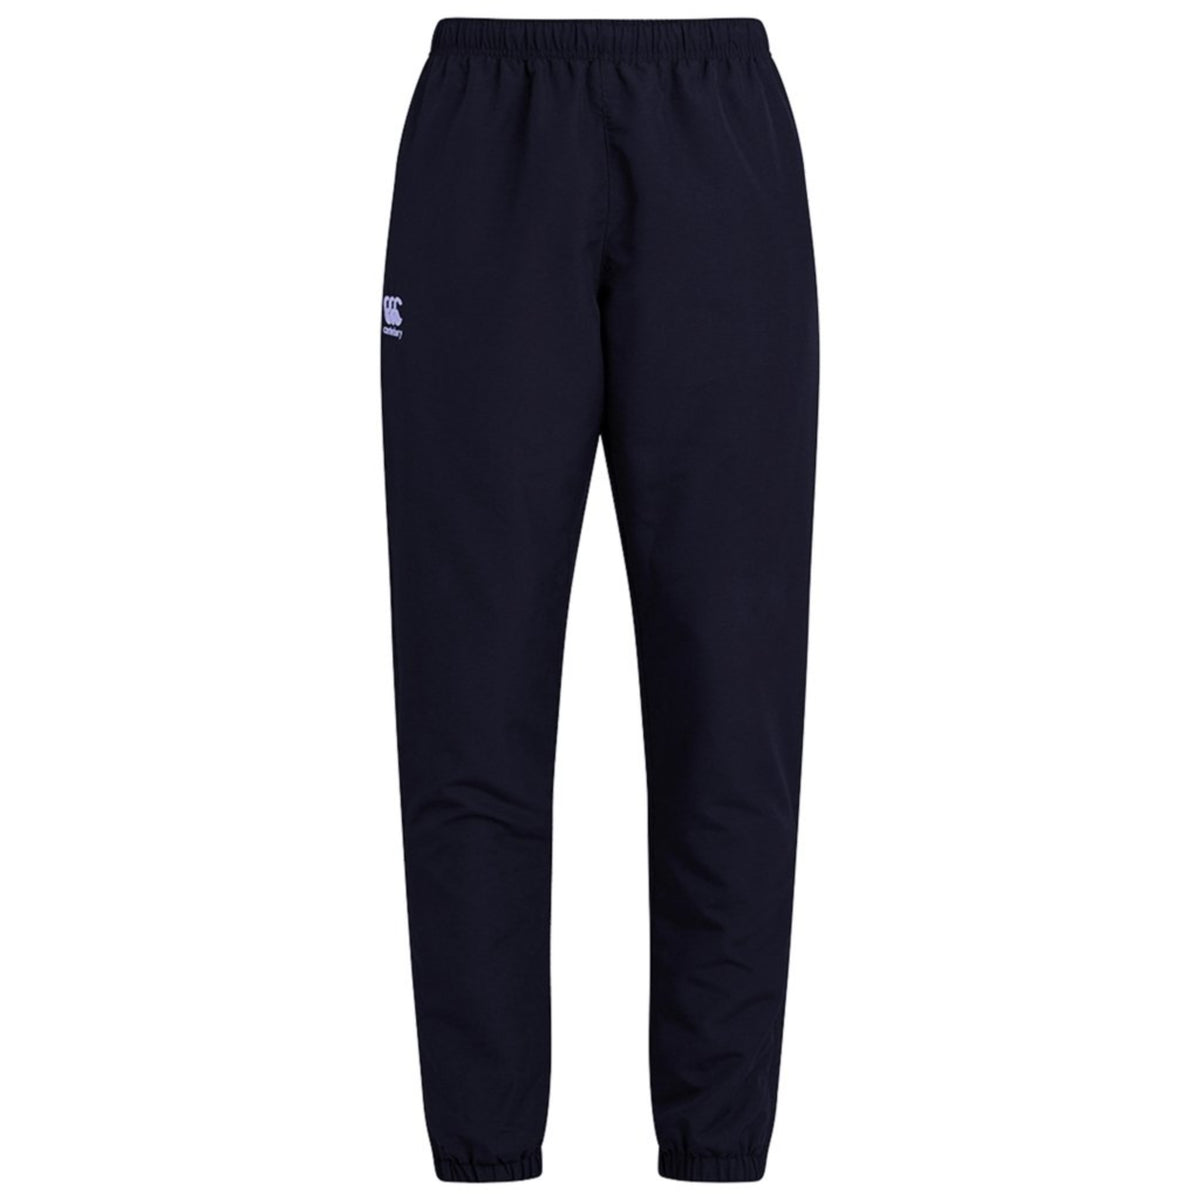 Rugby Ontario Referees CCC Club Track Pants - www.therugbyshop.com www.therugbyshop.com UNISEX / NAVY / XS TRS Distribution Canada PANTS Rugby Ontario Referees CCC Club Track Pants